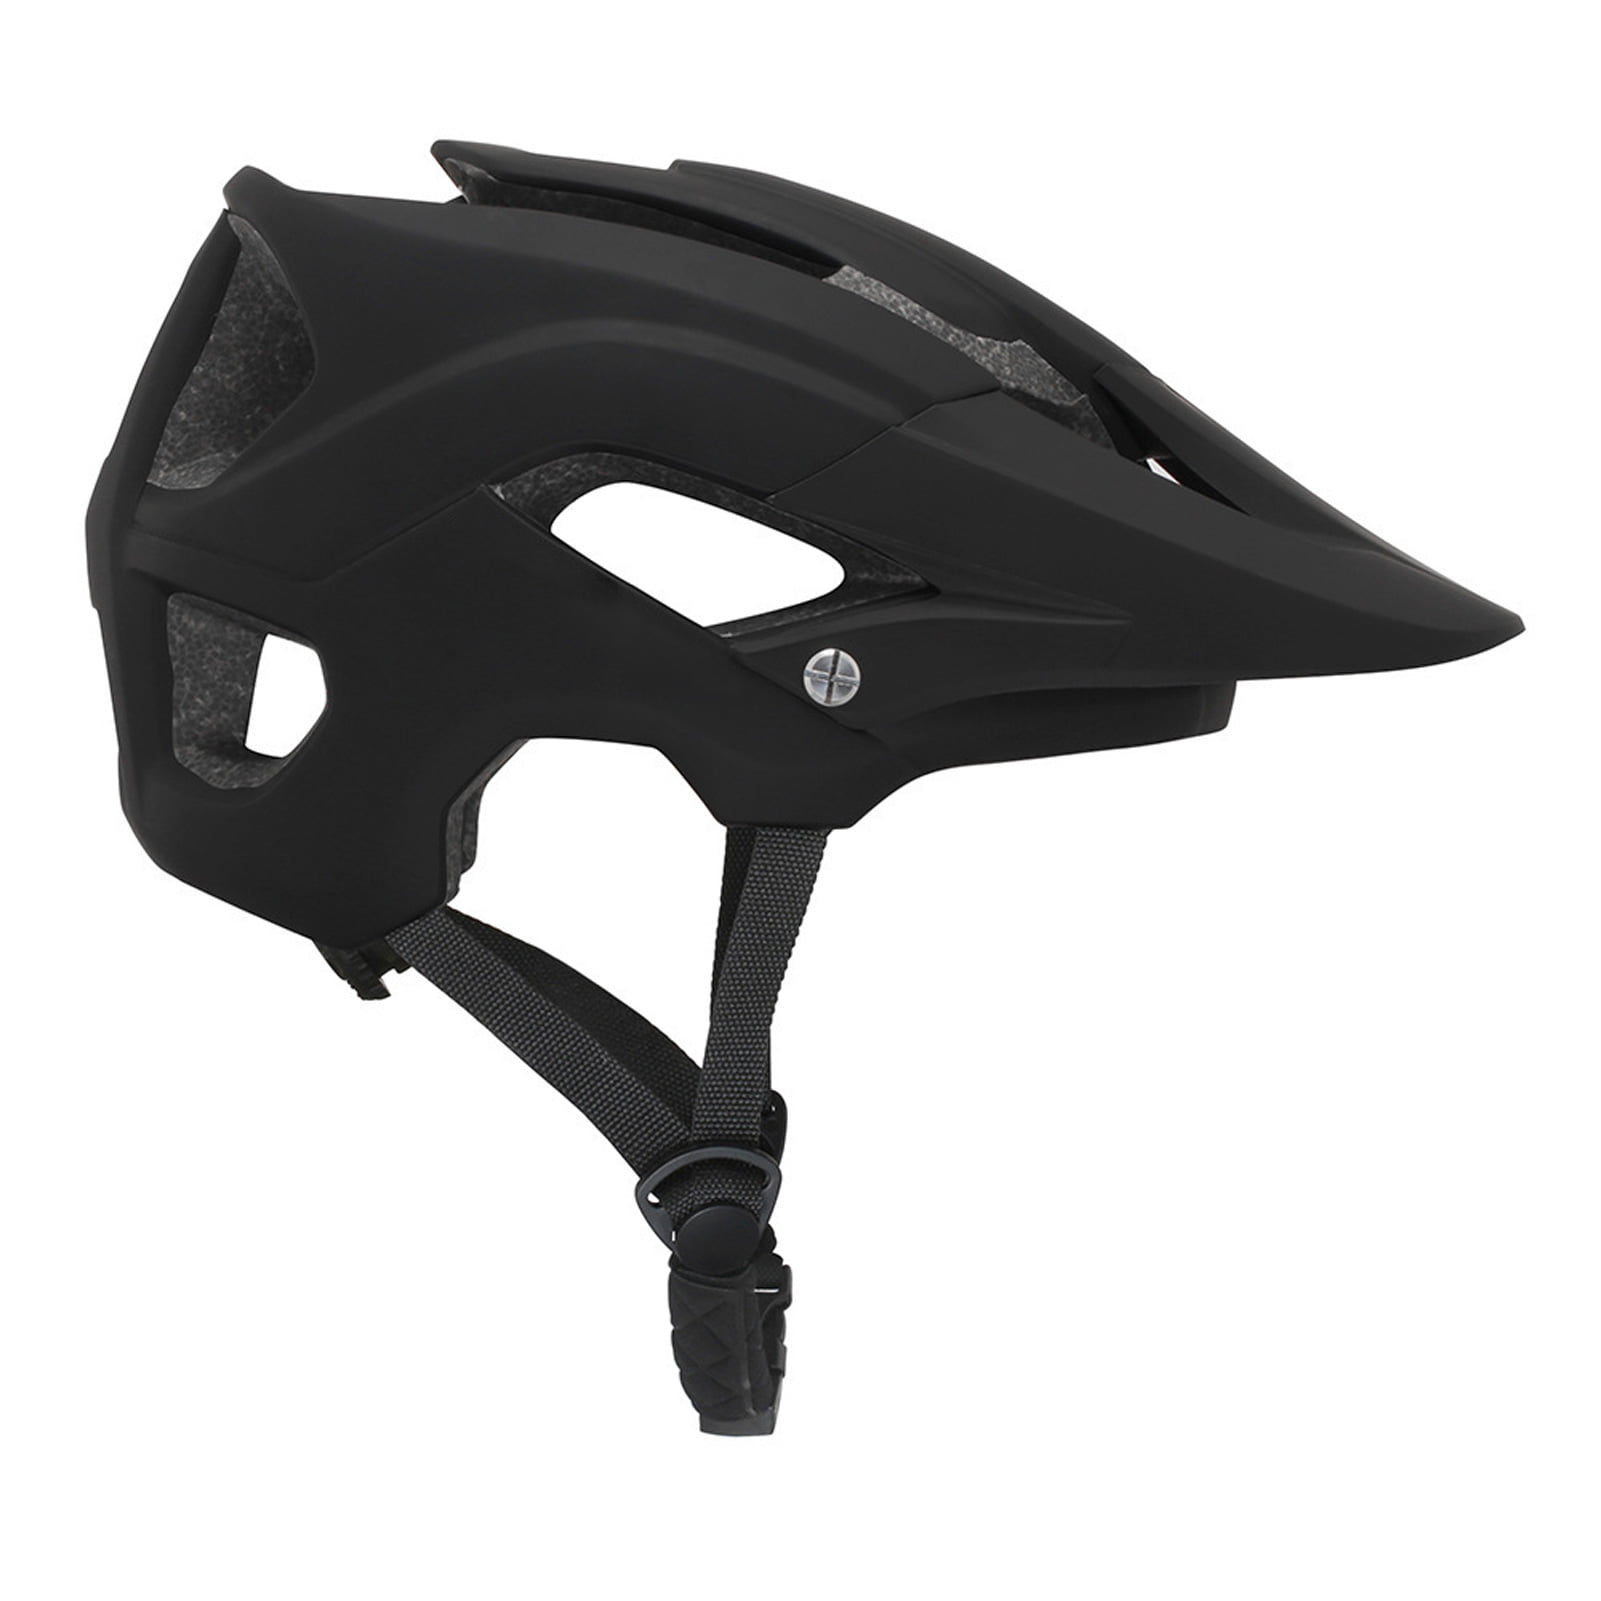 Details about   Ultralight Mountain Bicycle Helmet MTB Road Cycling Bike Sports Safety Helmet 